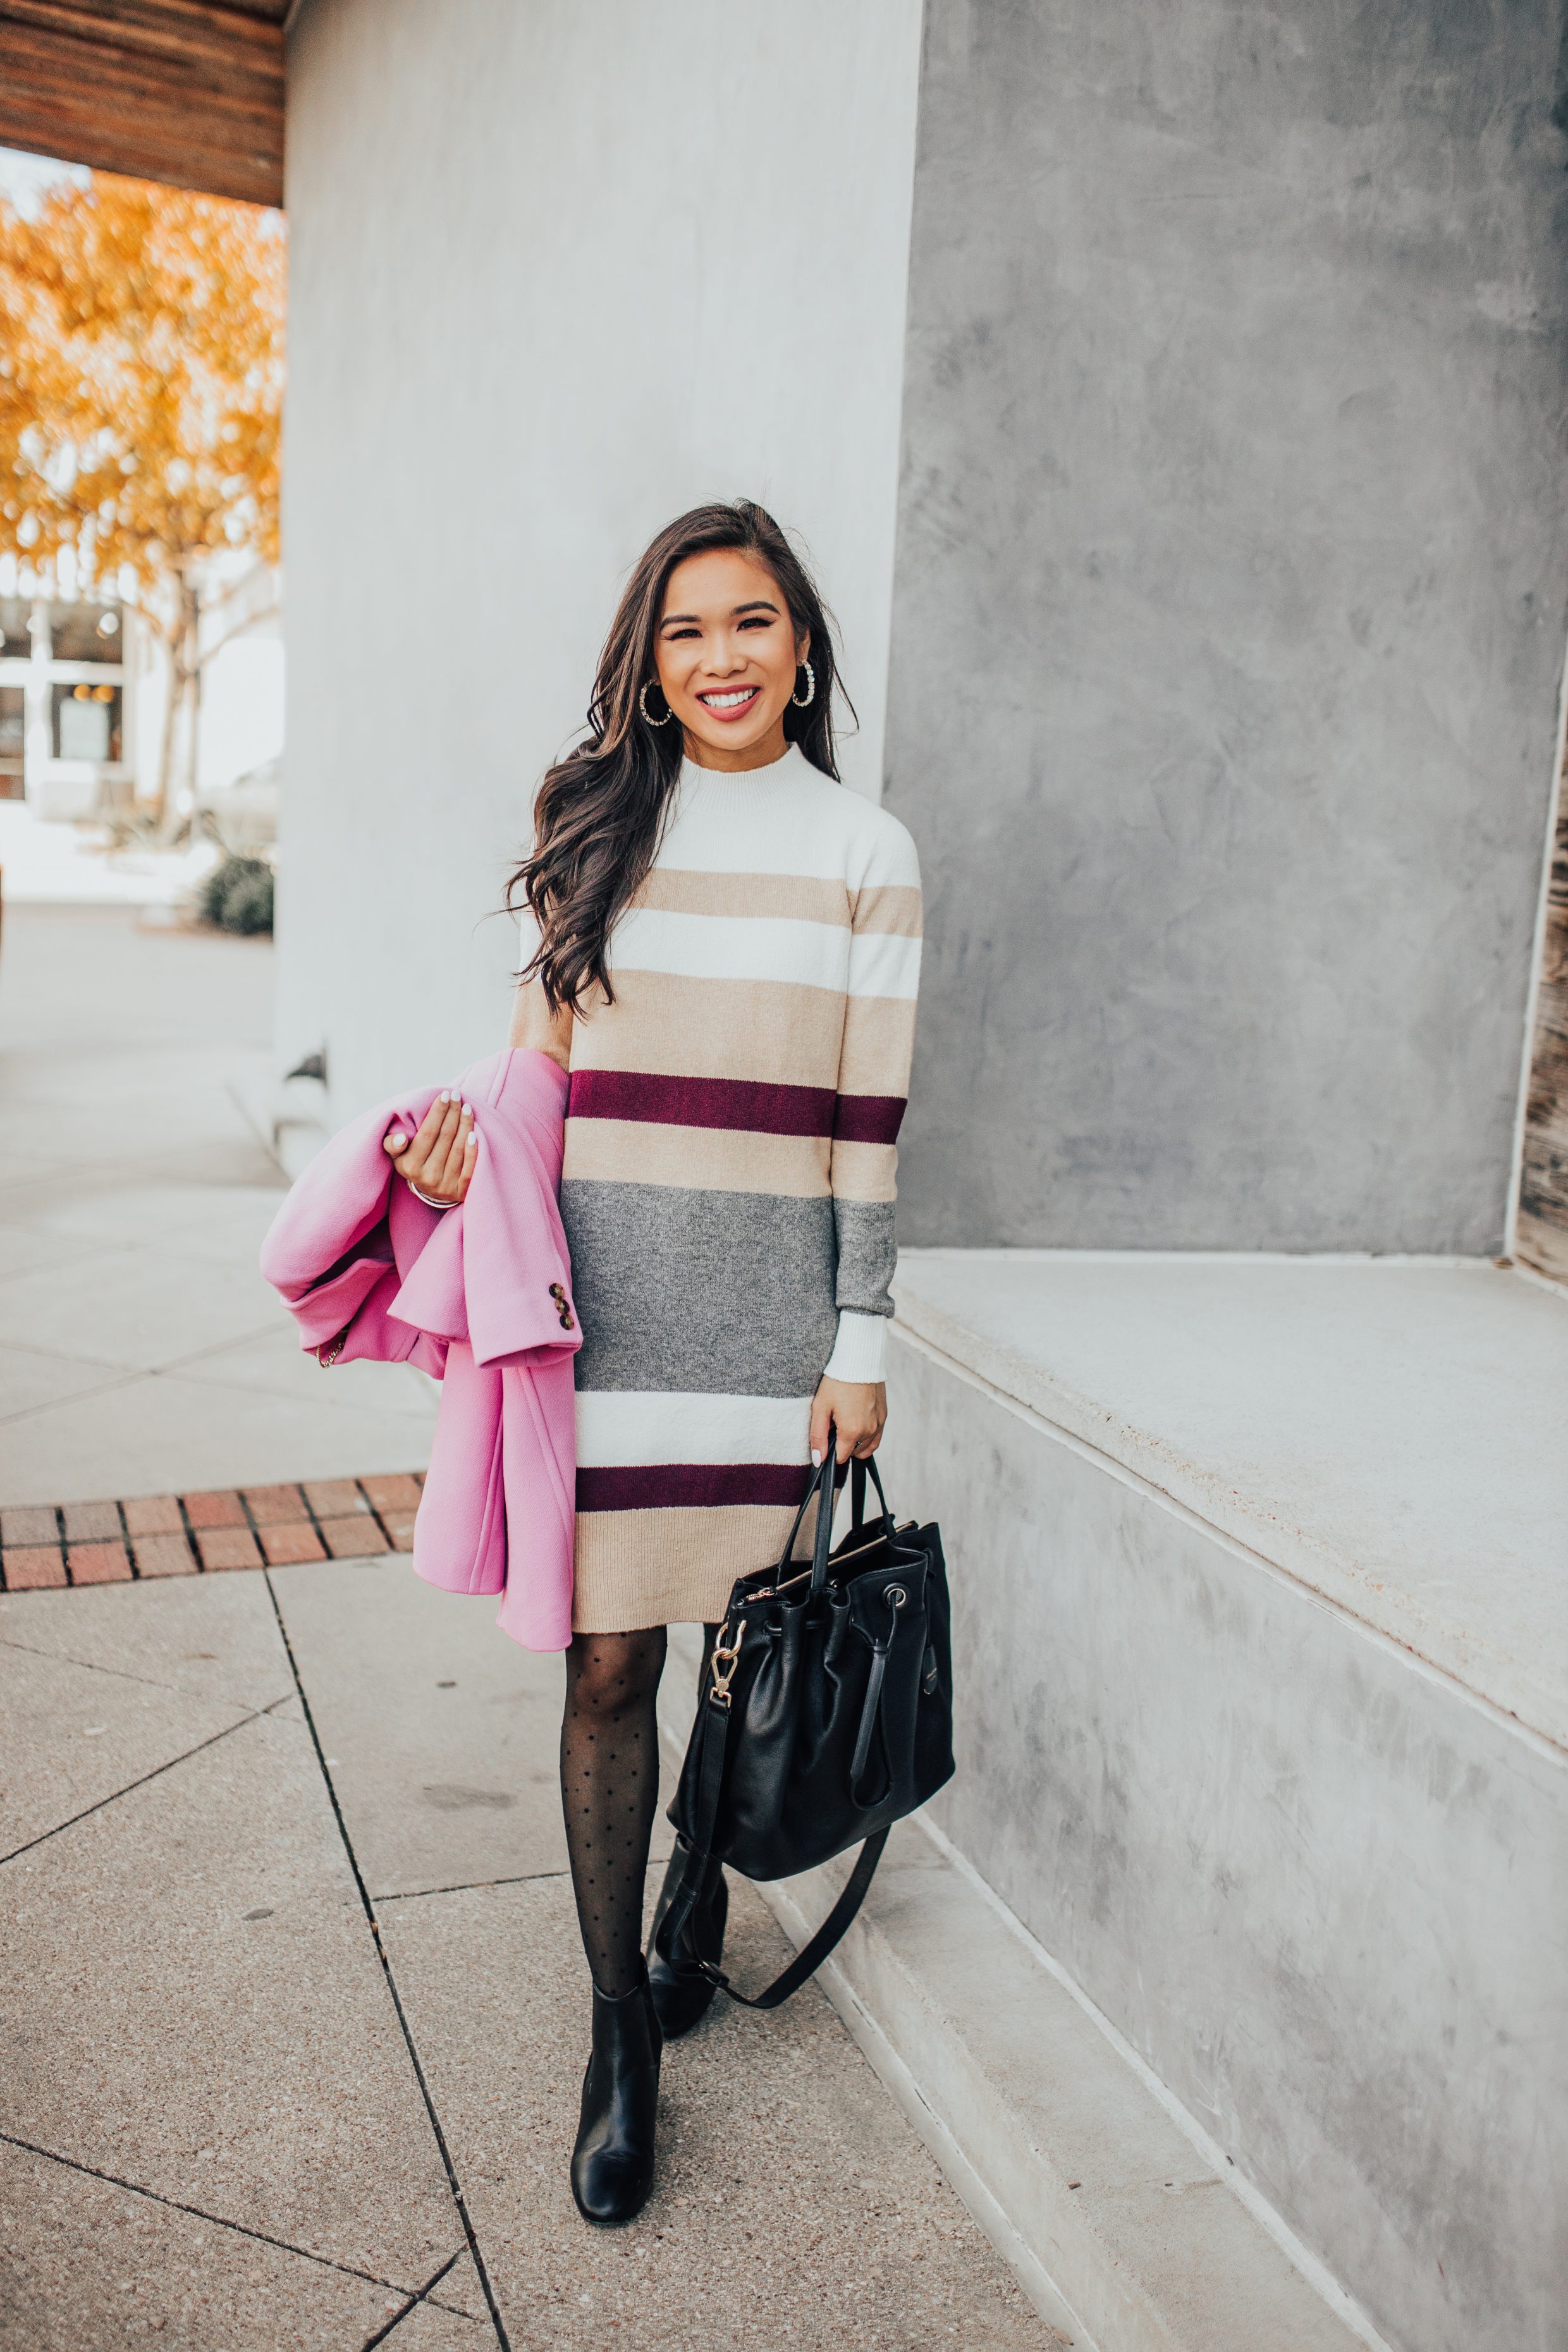 Winter workwear outfit with a striped mockneck sweater dress, pink winter coat and polka dot tights